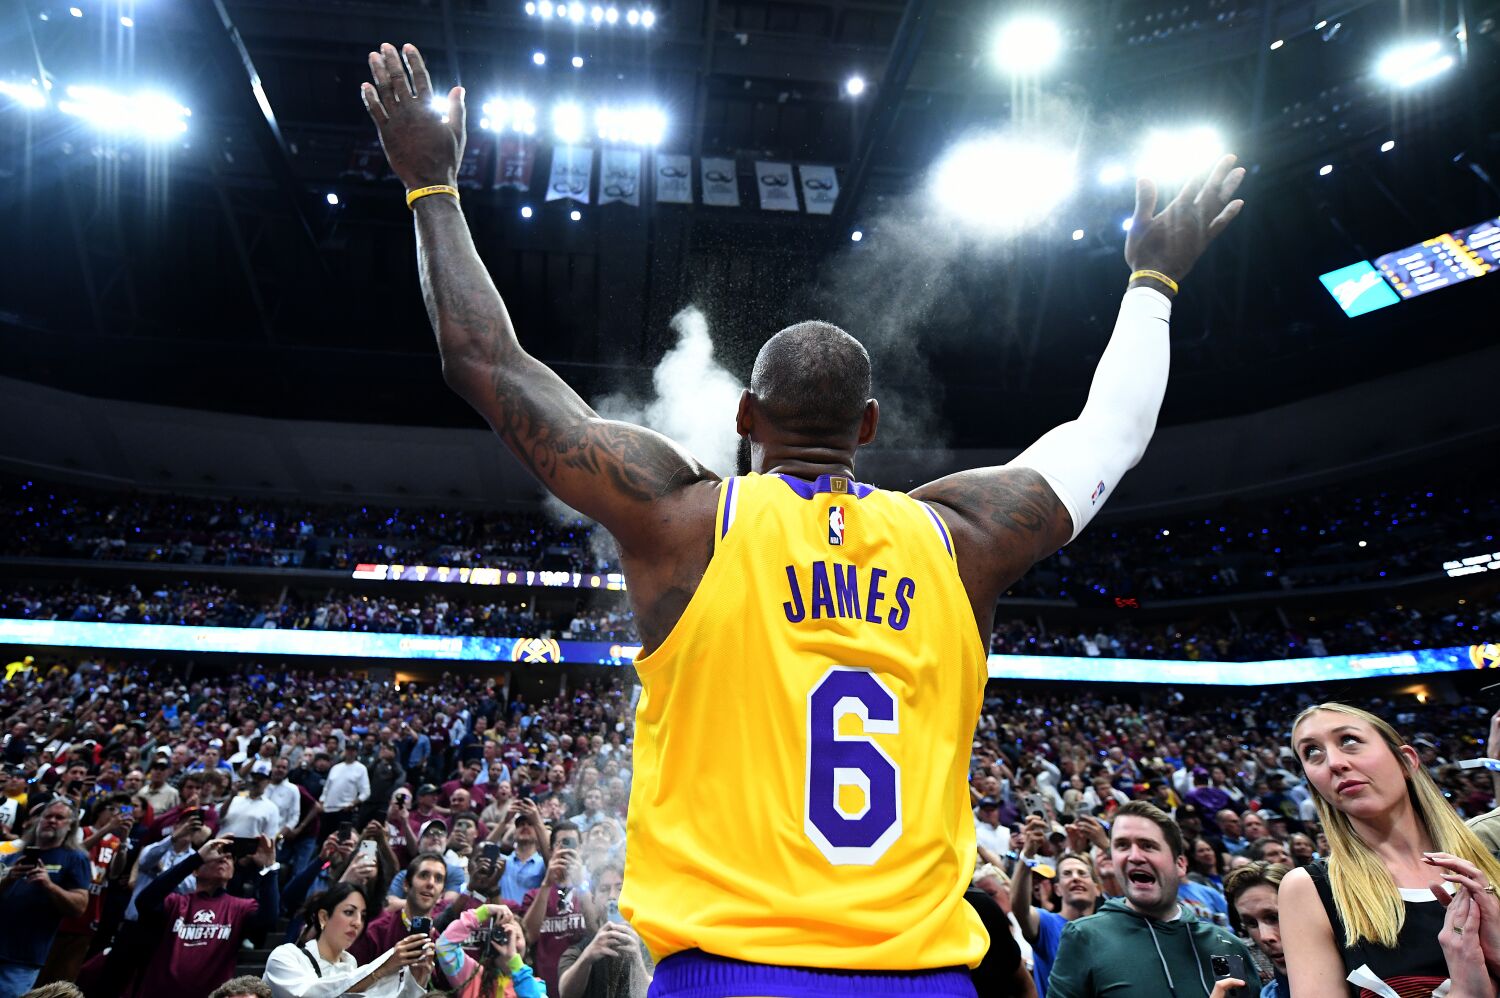 Lakers to retire LeBron James' jersey. But which one, No. 23 or No. 6, or maybe both?